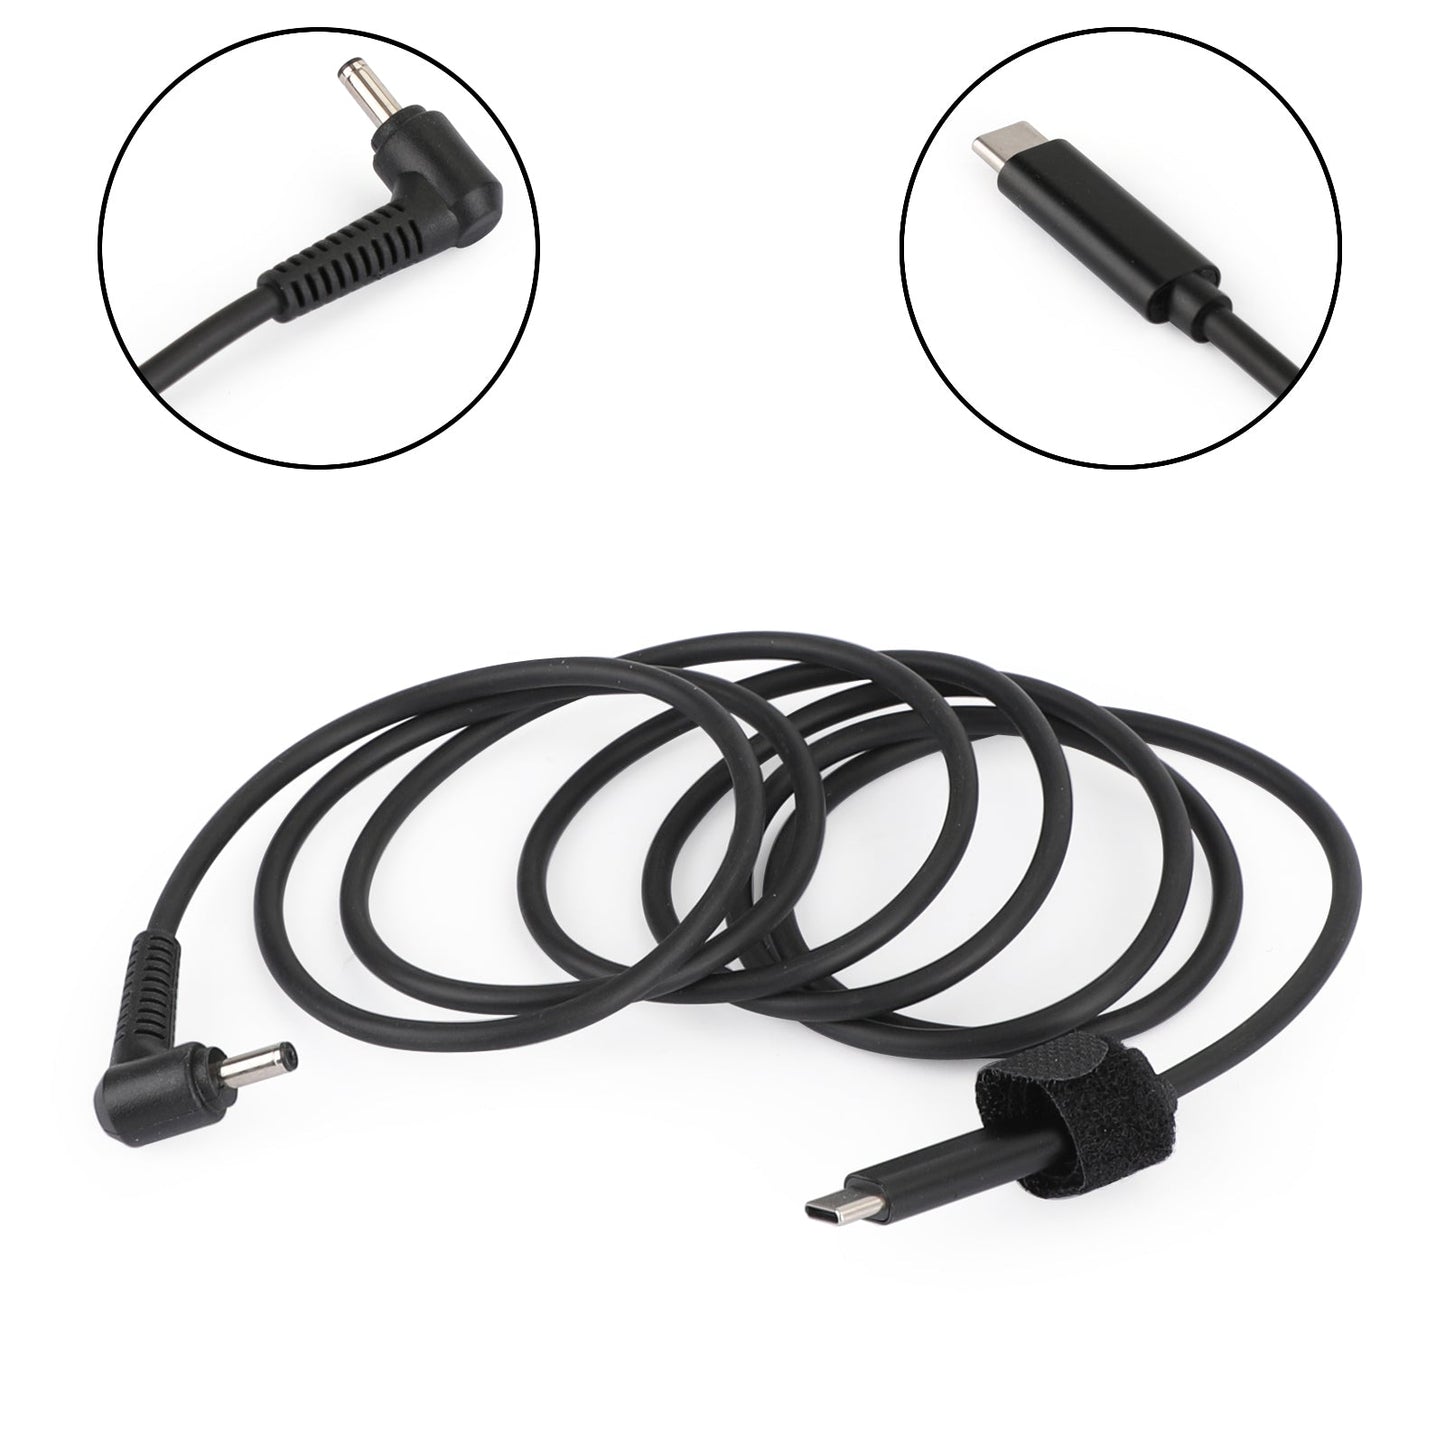 1.5m Type-C PD USB Charger Cable 4.0*1.35mm Fit for ASUS Zenbook Vivobook